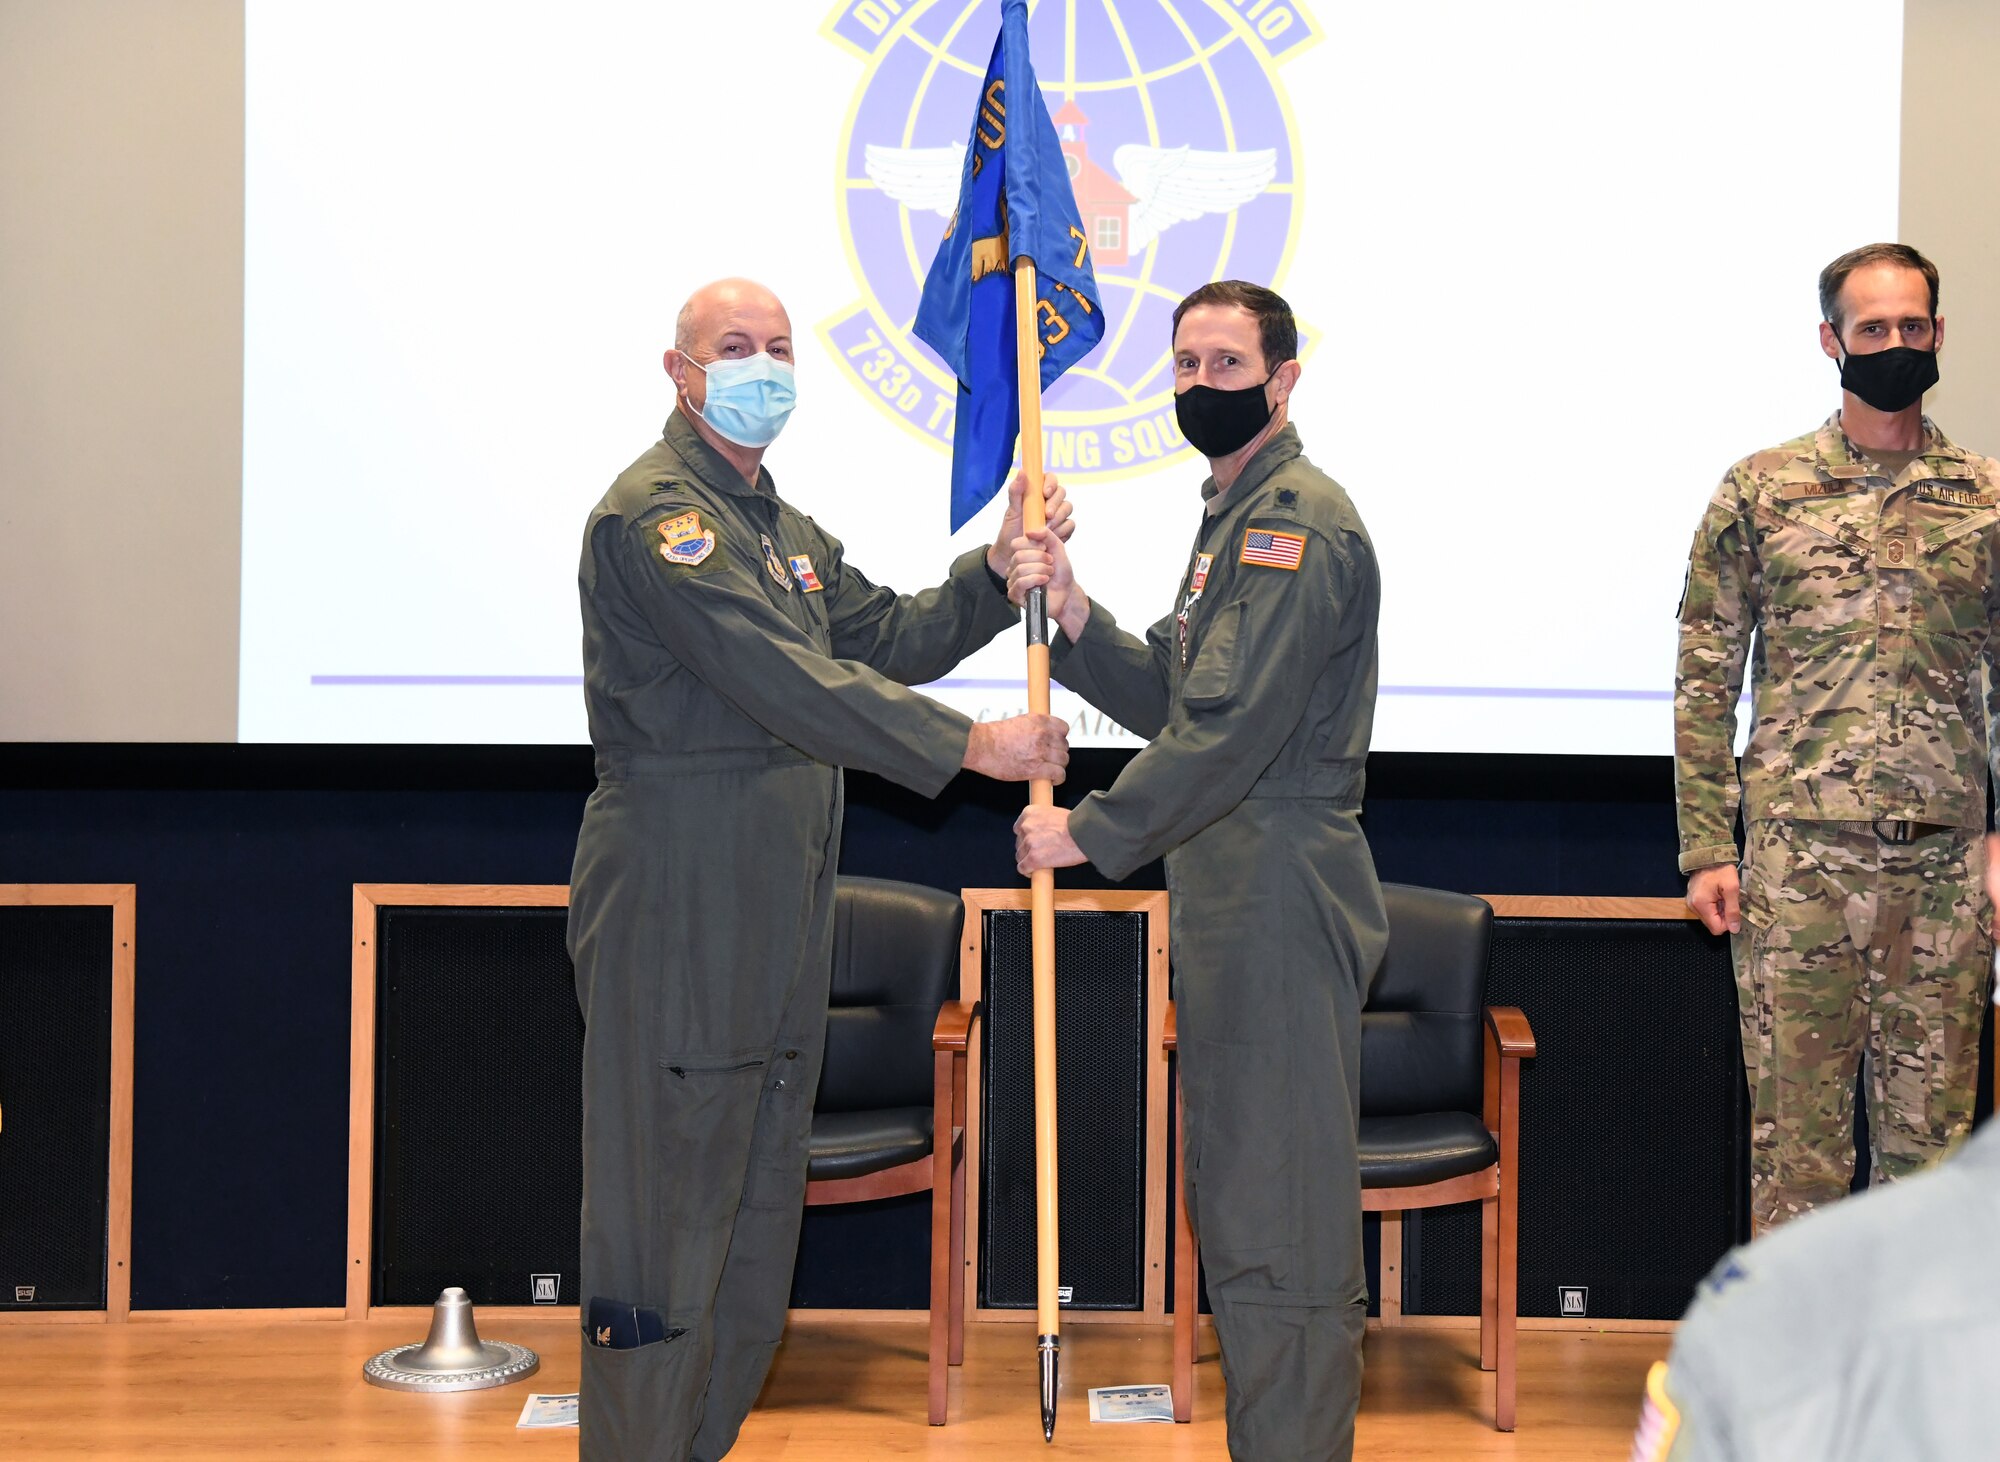 Col. James "JC" Miller, 433rd Operations Group commander, passes the 733rd Training Squadron's guidon to Lt. Col. Steven Radtke signifying his accepting command of the unit Sept. 10, 2021 at Joint Base San Antonio-Lackland, Texas. Previous to this assignment, Radtke was the 356th Training Squadron commander here. (U.S. Air Force photo by Master Sgt. Kristian Carter)